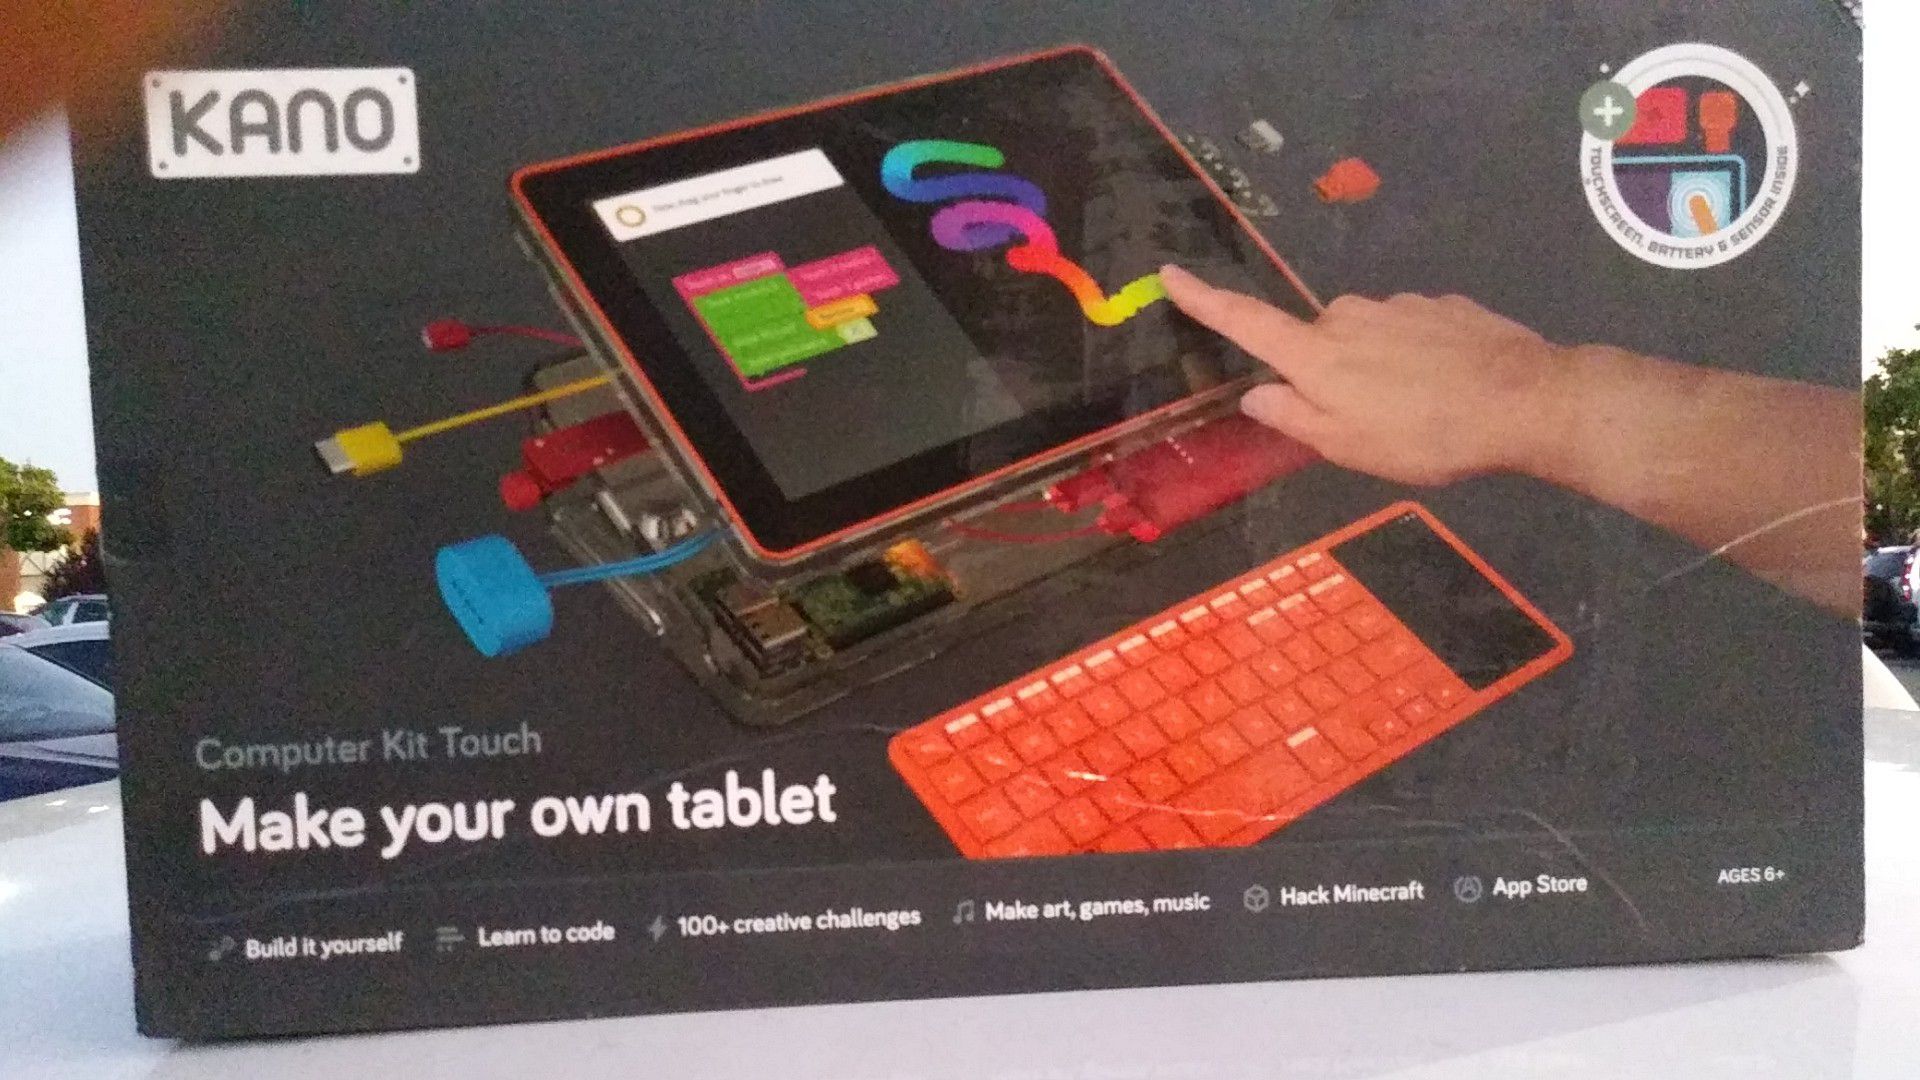 KANO° Build Your Own Tablet(computer kit touch)